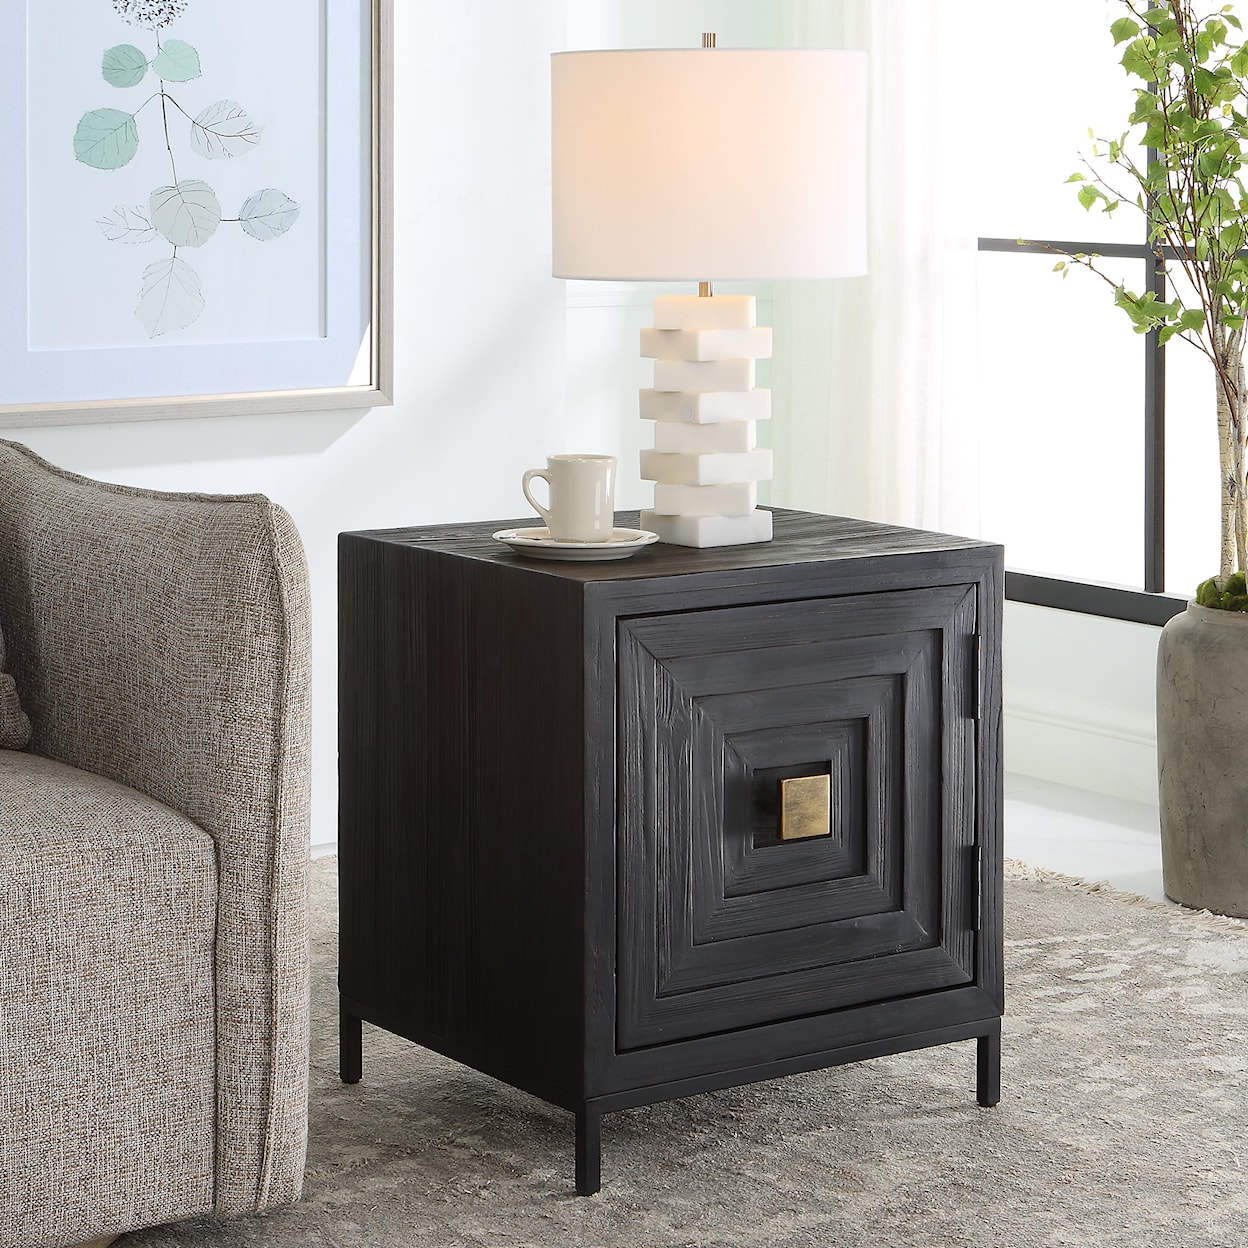 Uttermost Aiken Geometric End Table with Storage